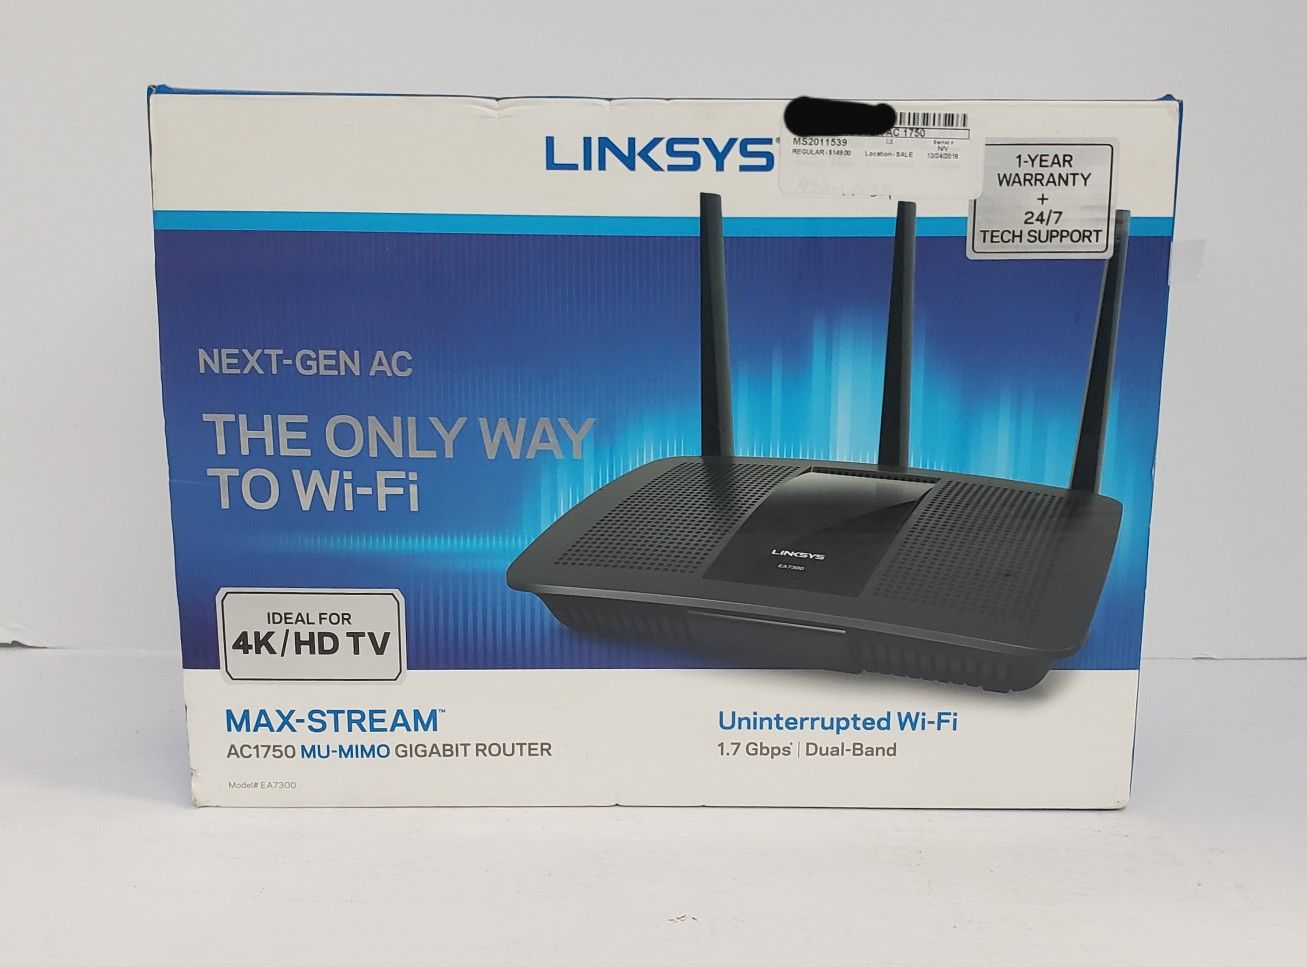 Brand New Linksys Next- Gen AC The Only Way to Wi-Fi Max- Stream AC1750 MU- MIMO GIGABIT ROUTER EA7300